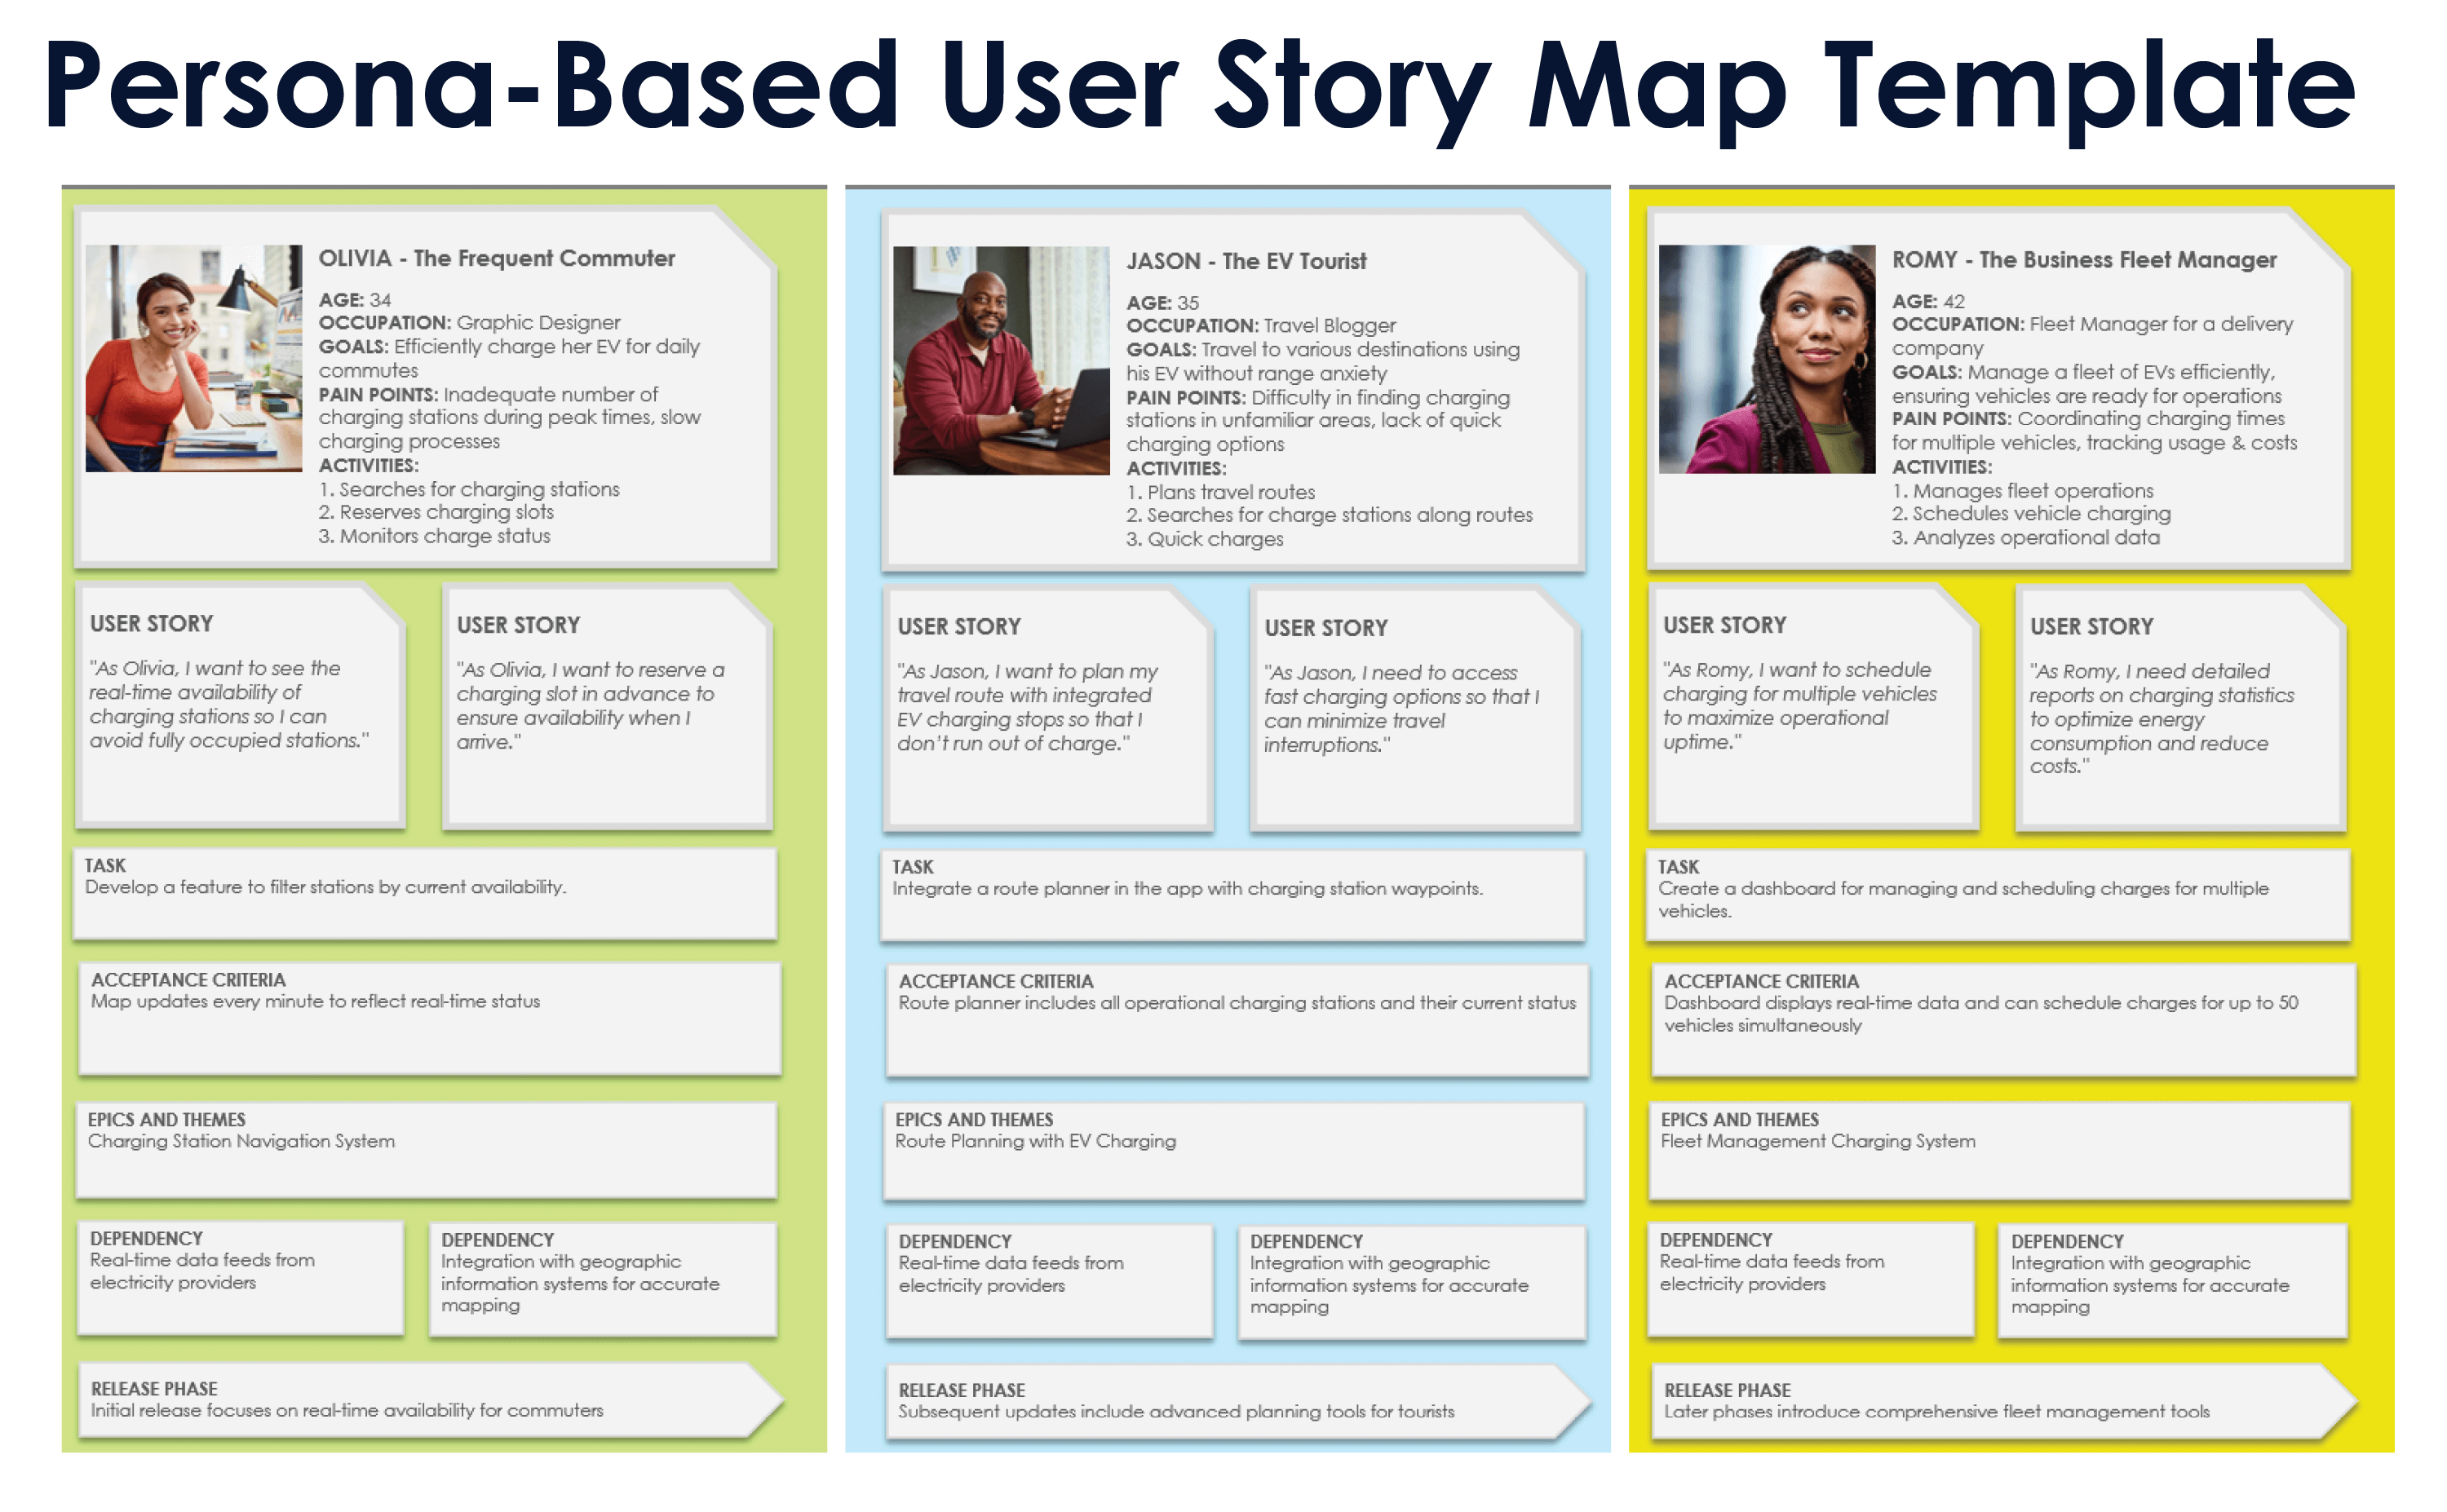 Persona-based User Story Map Template